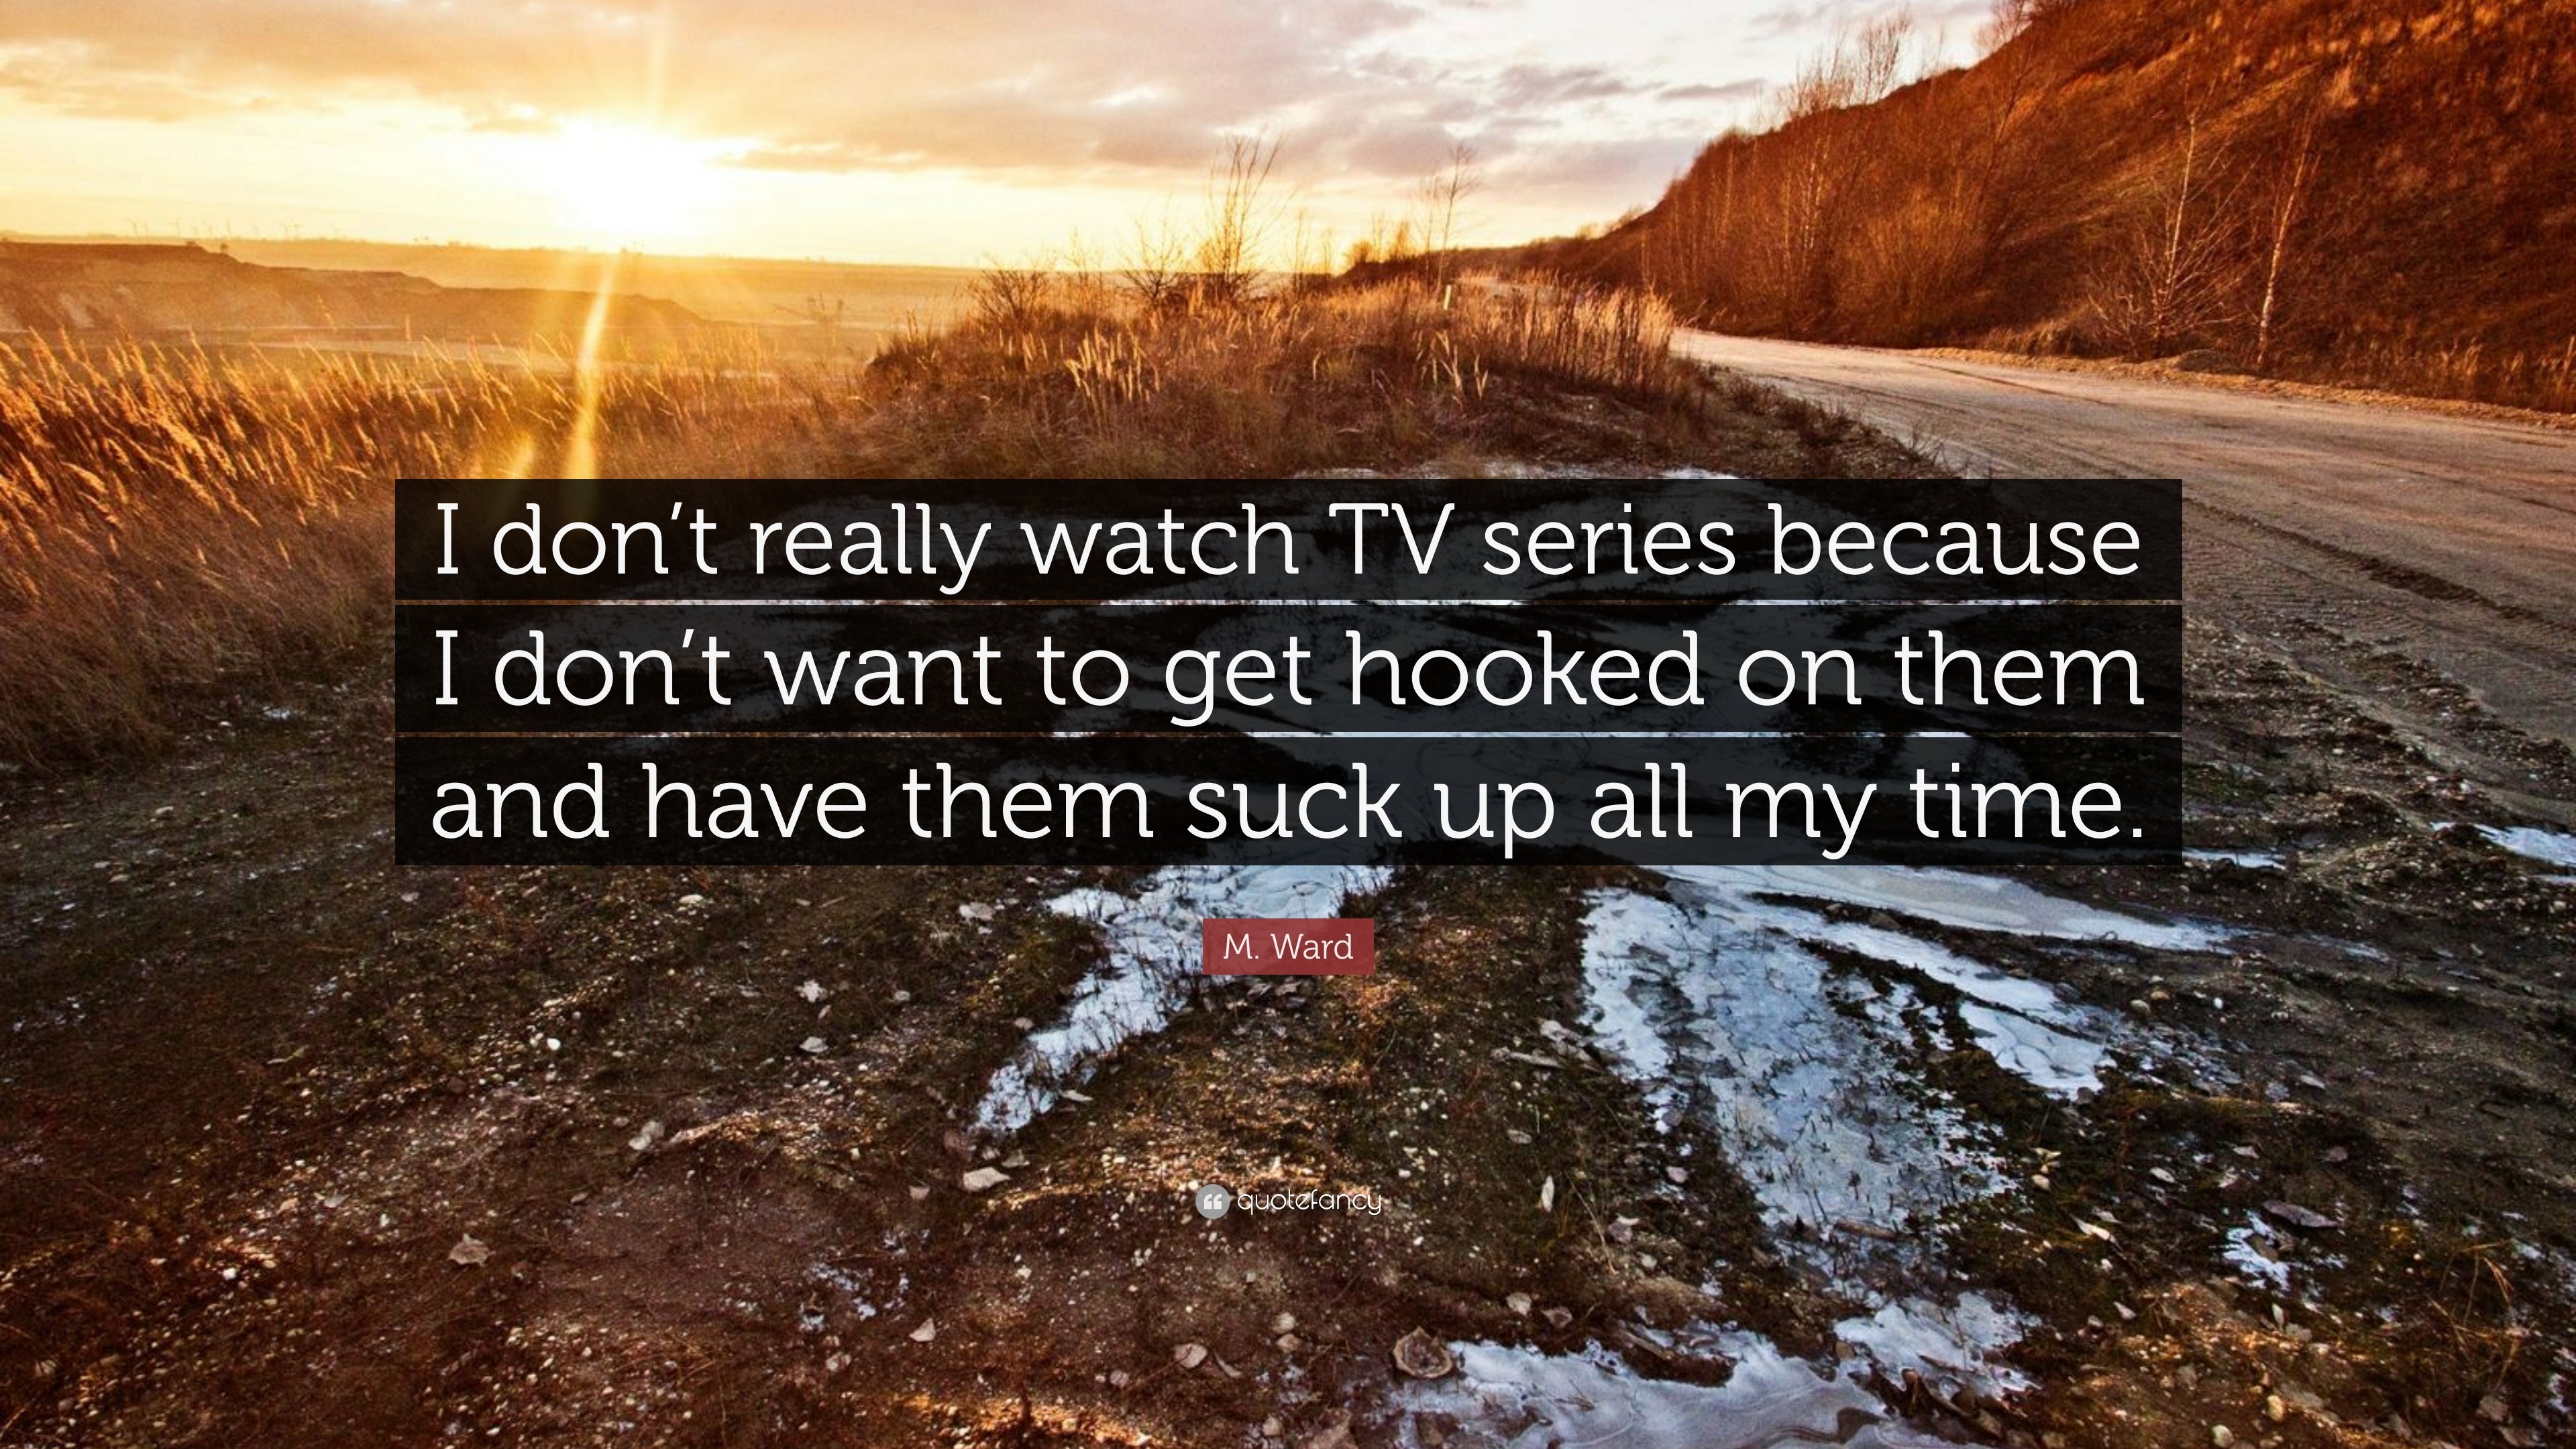 https://quotefancy.com/media/wallpaper/3840x2160/1128150-M-Ward-Quote-I-don-t-really-watch-TV-series-because-I-don-t-want.jpg